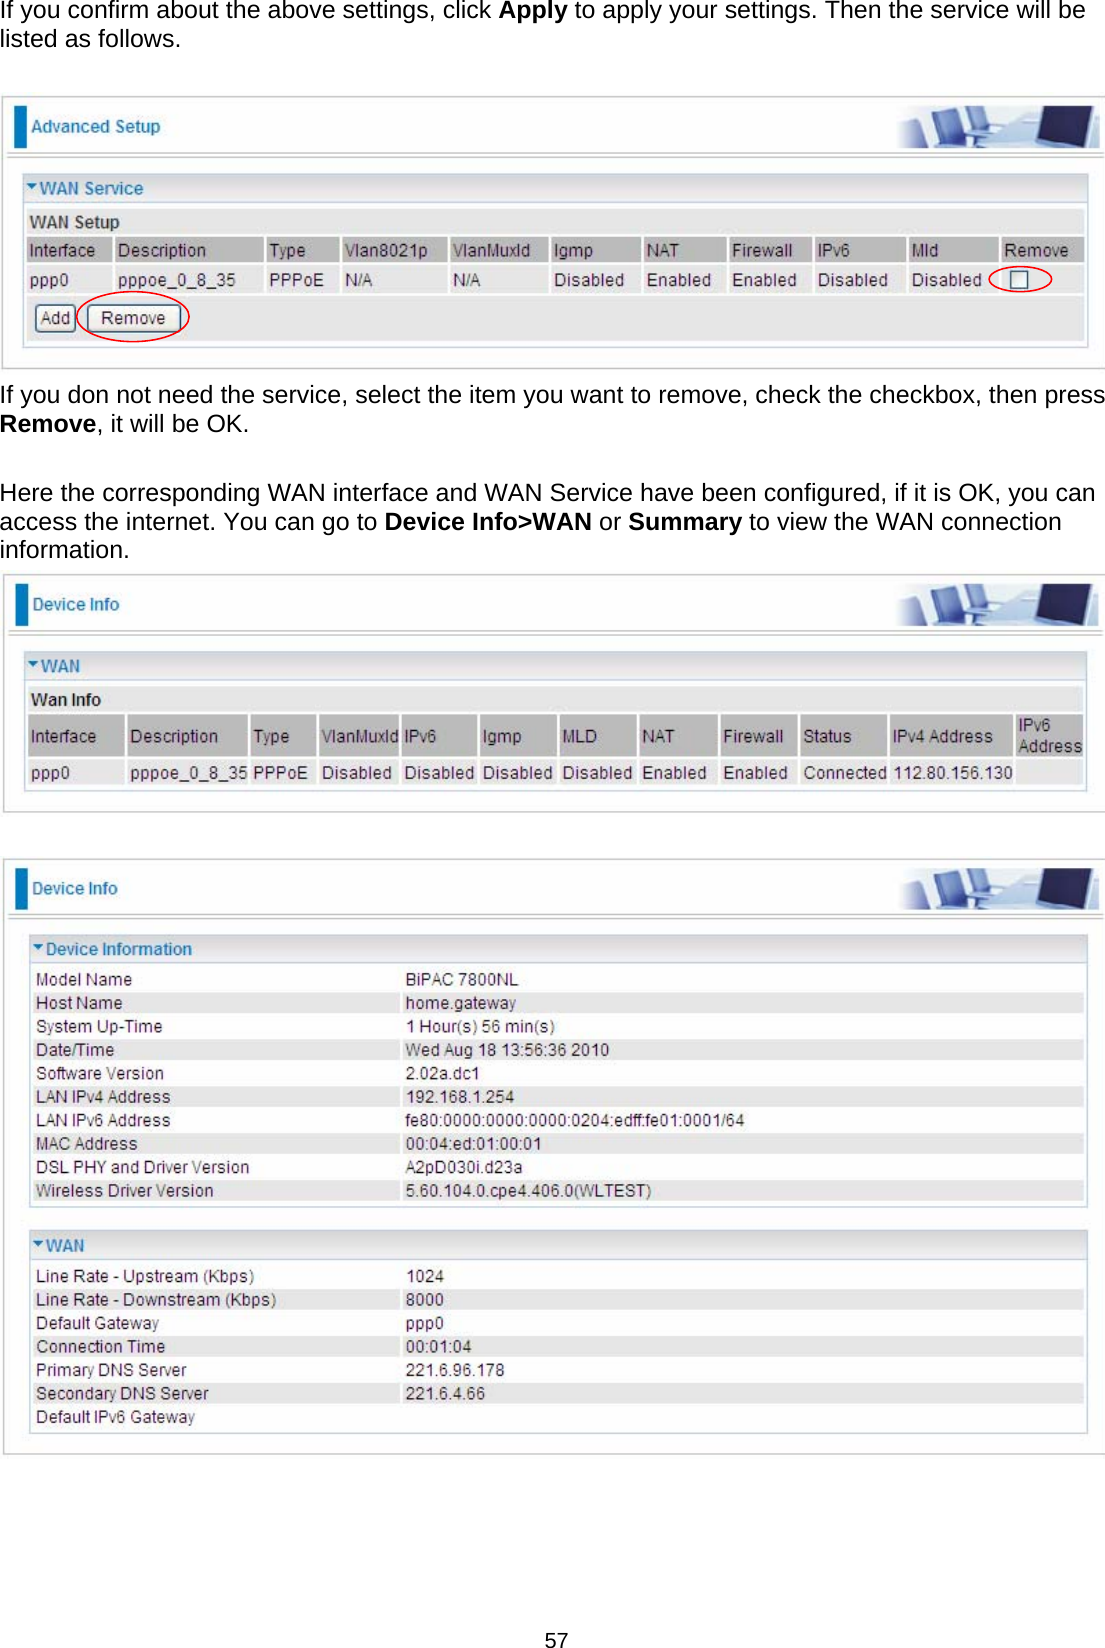  57 If you confirm about the above settings, click Apply to apply your settings. Then the service will be listed as follows.   If you don not need the service, select the item you want to remove, check the checkbox, then press Remove, it will be OK.  Here the corresponding WAN interface and WAN Service have been configured, if it is OK, you can access the internet. You can go to Device Info&gt;WAN or Summary to view the WAN connection information.        